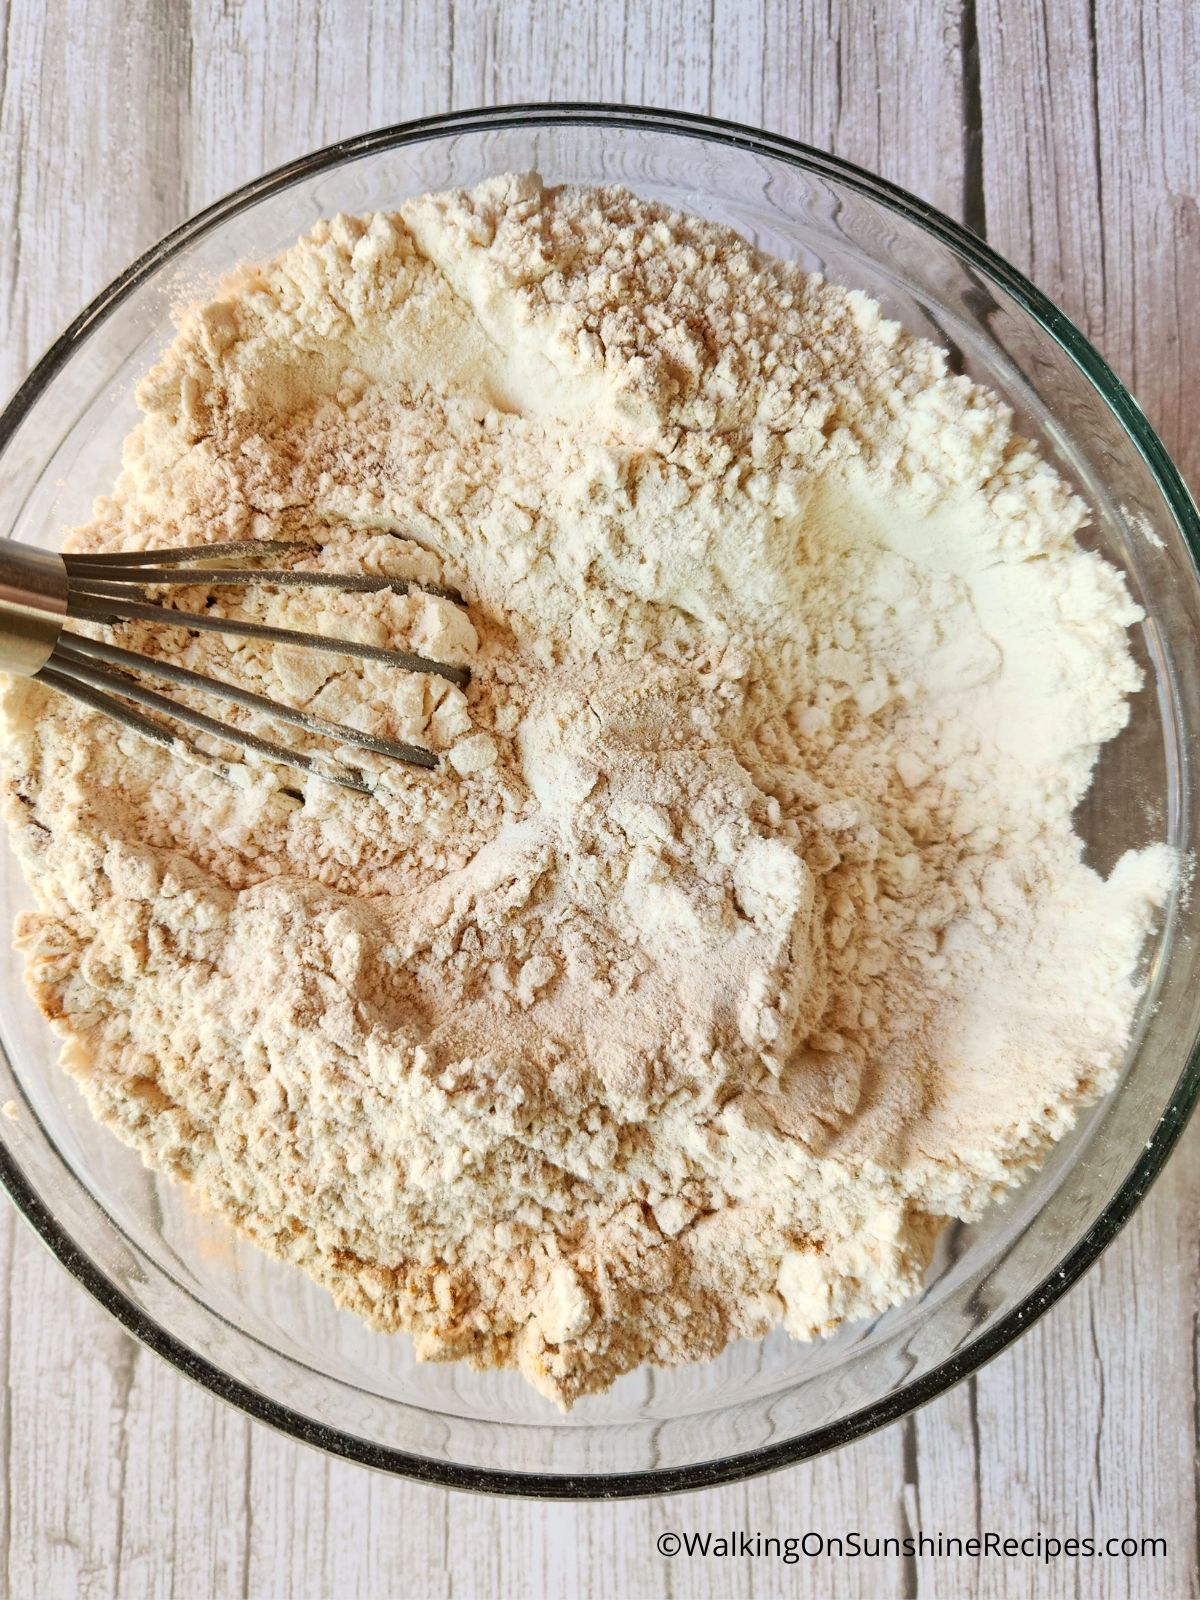 combine dry ingredients in bowl with whisk.